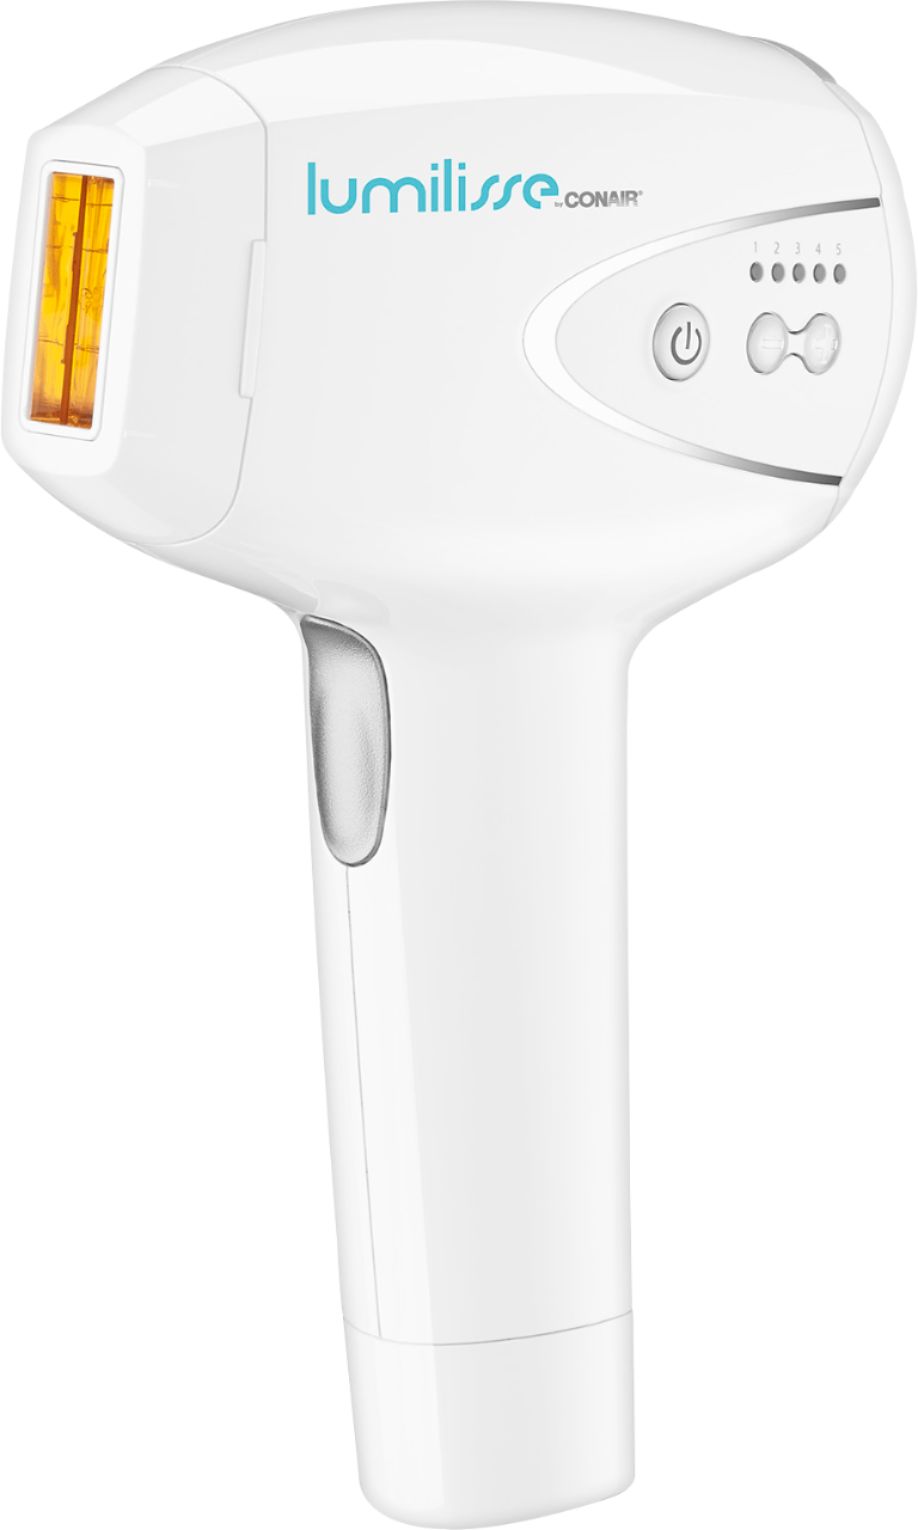 Angle View: Conair - Lumilisse IPL Hair Remover - White